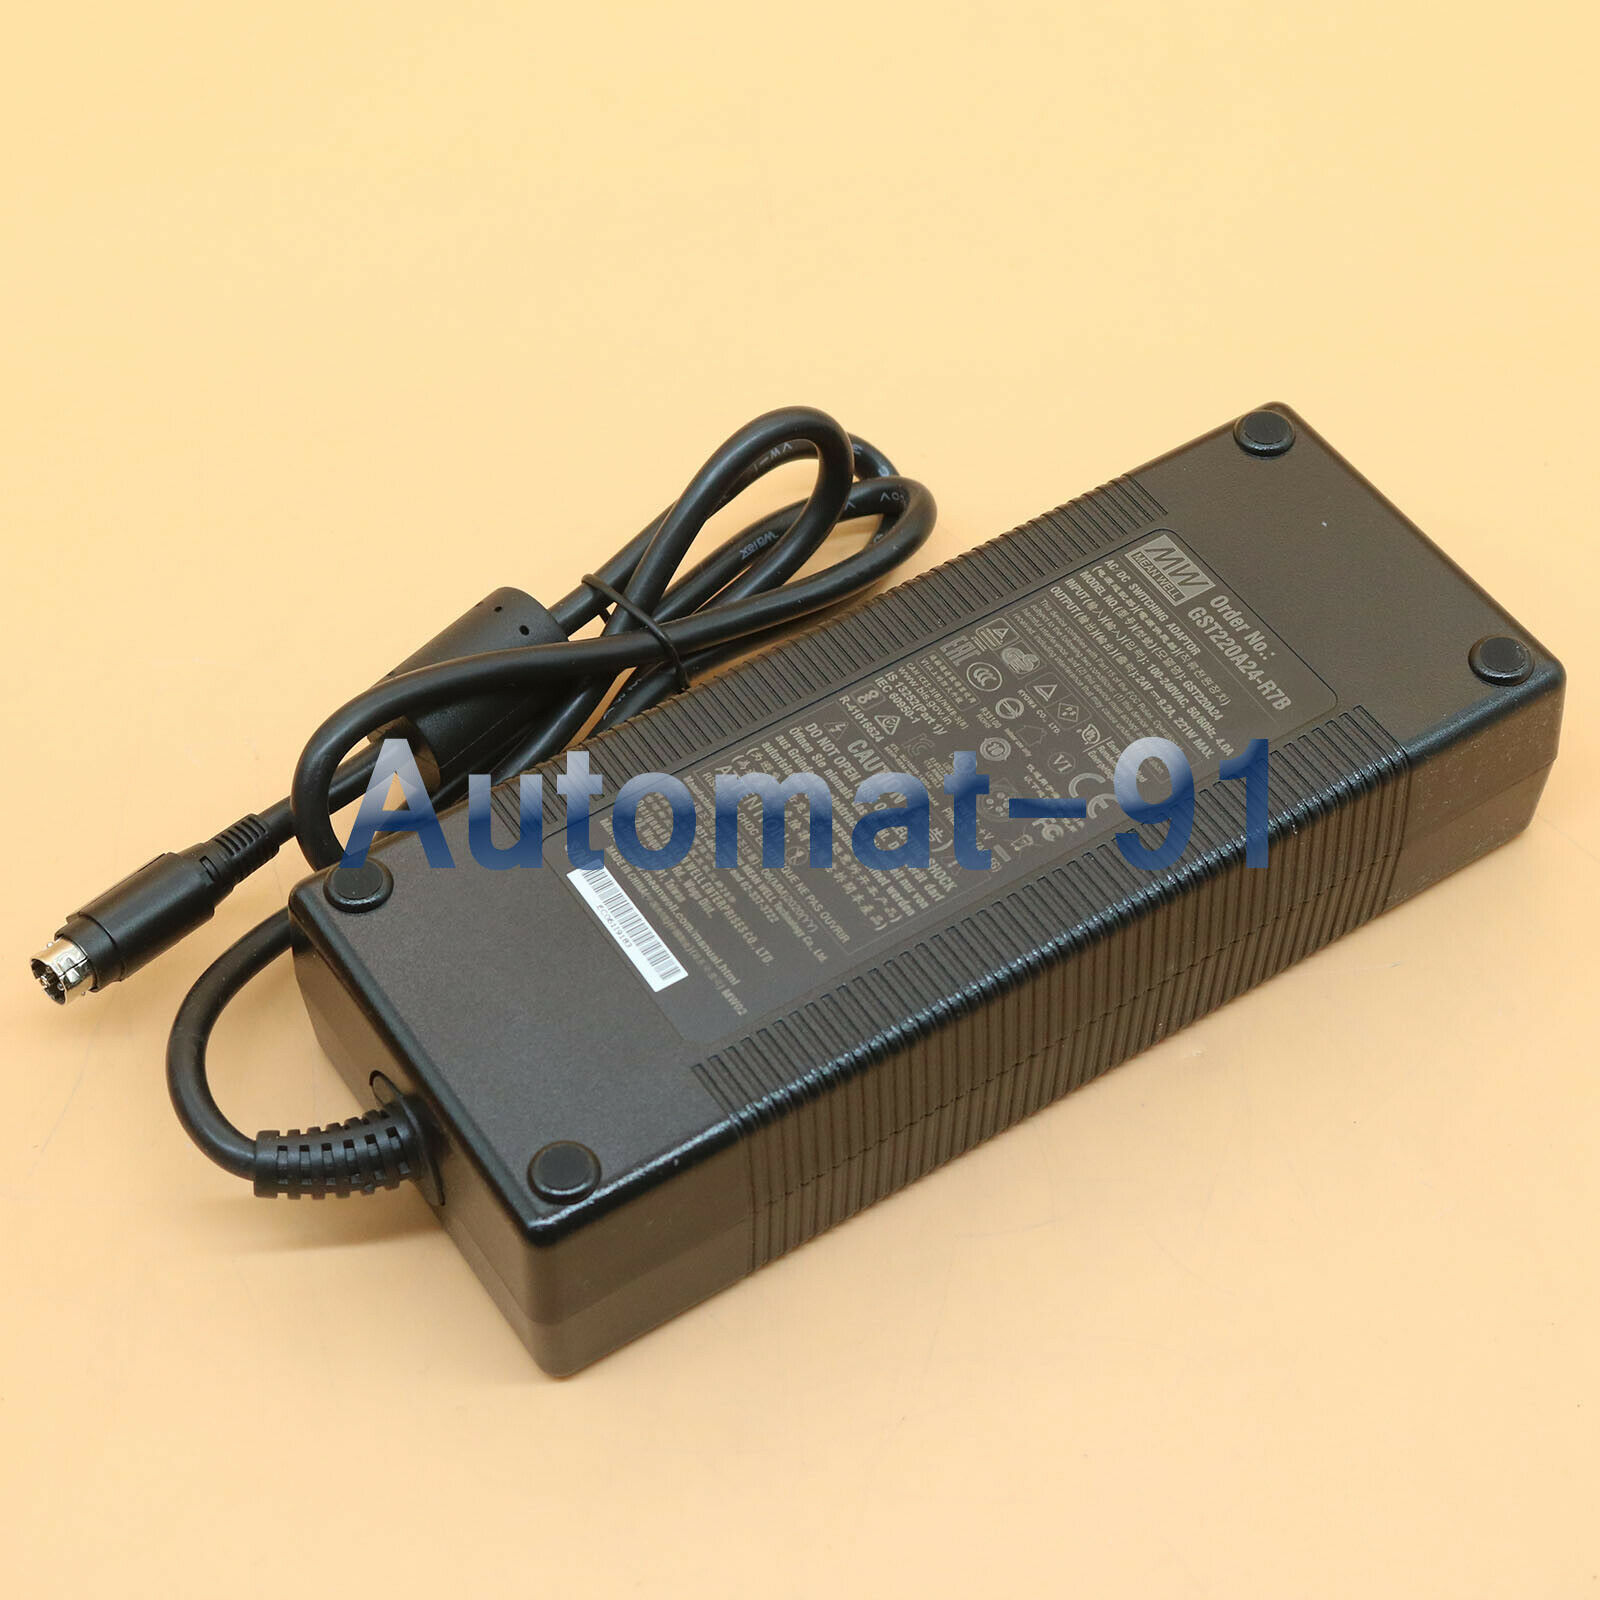 *Brand NEW* KUANTEN Model KT56W280200M2 DR-6360 LED Nail Lamp 28V AC DC Adapter Charger